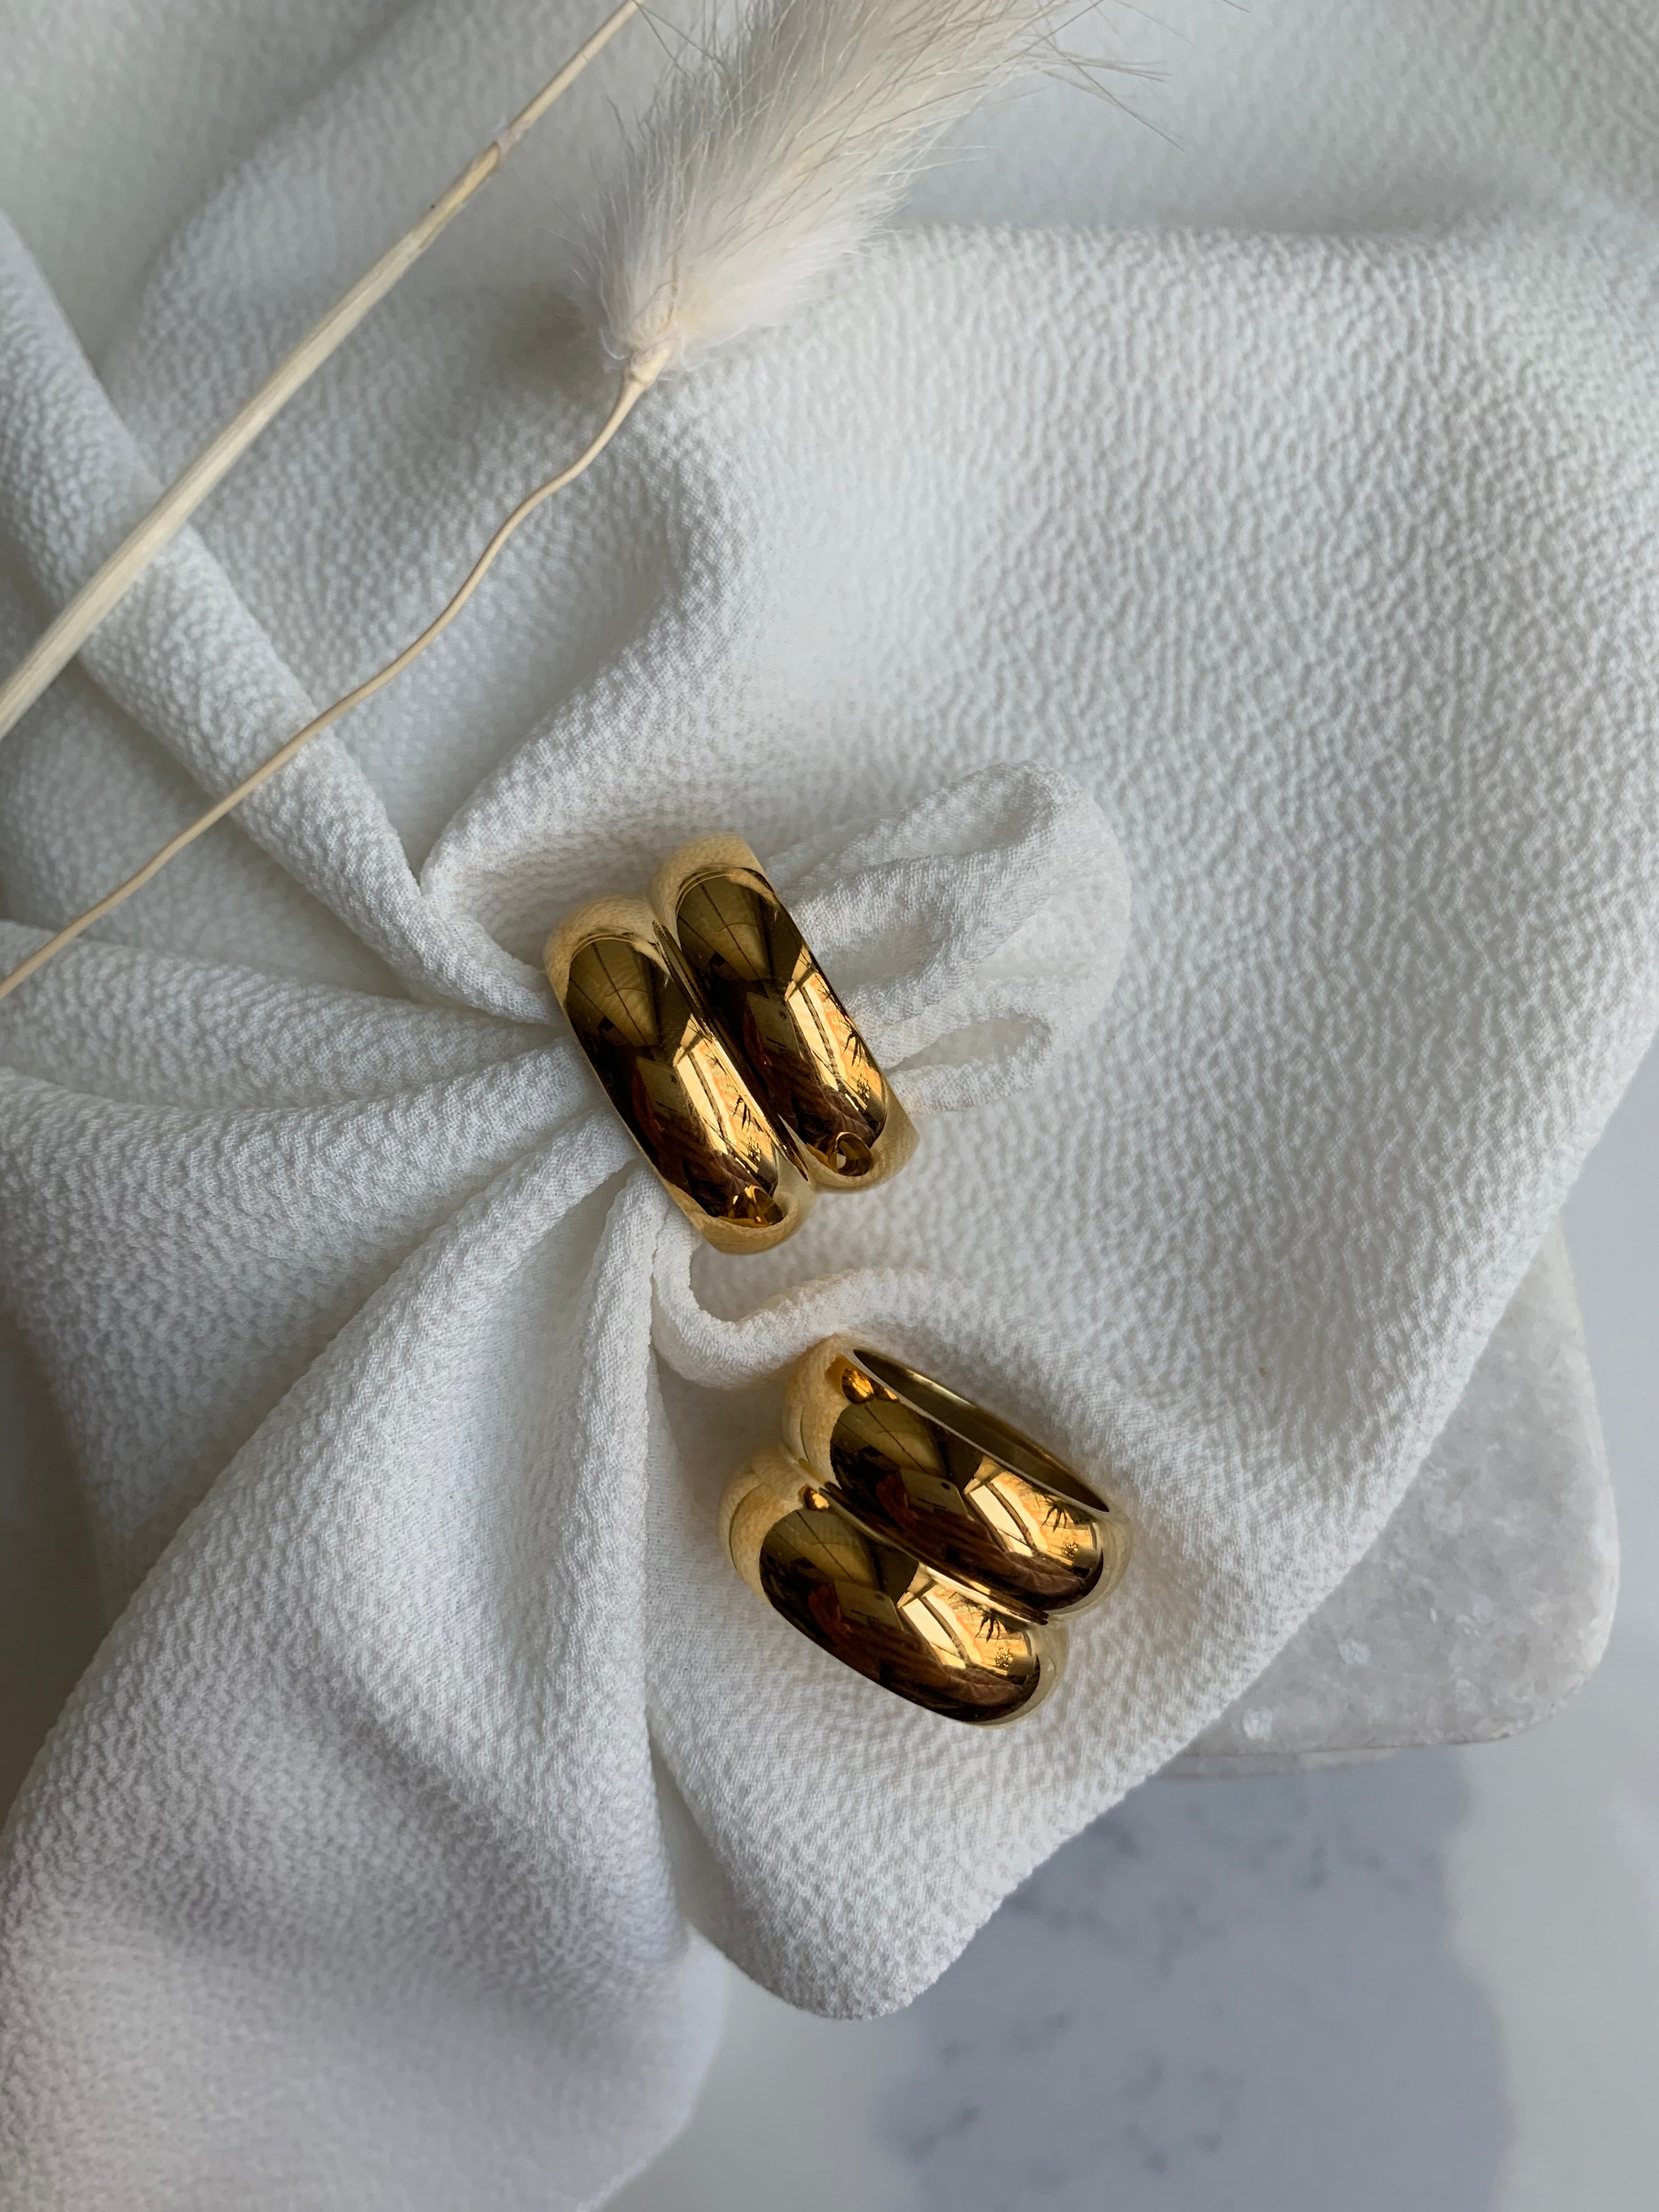 Double stacked, double the power, double the style, double the opportunity! 14K Gold Plated Hypoallergenic Tarnish Resistant Available sizes: 6, 7, 8 | Olivia Ring | Non-tarnish 14k Jewellery EasyClubCo